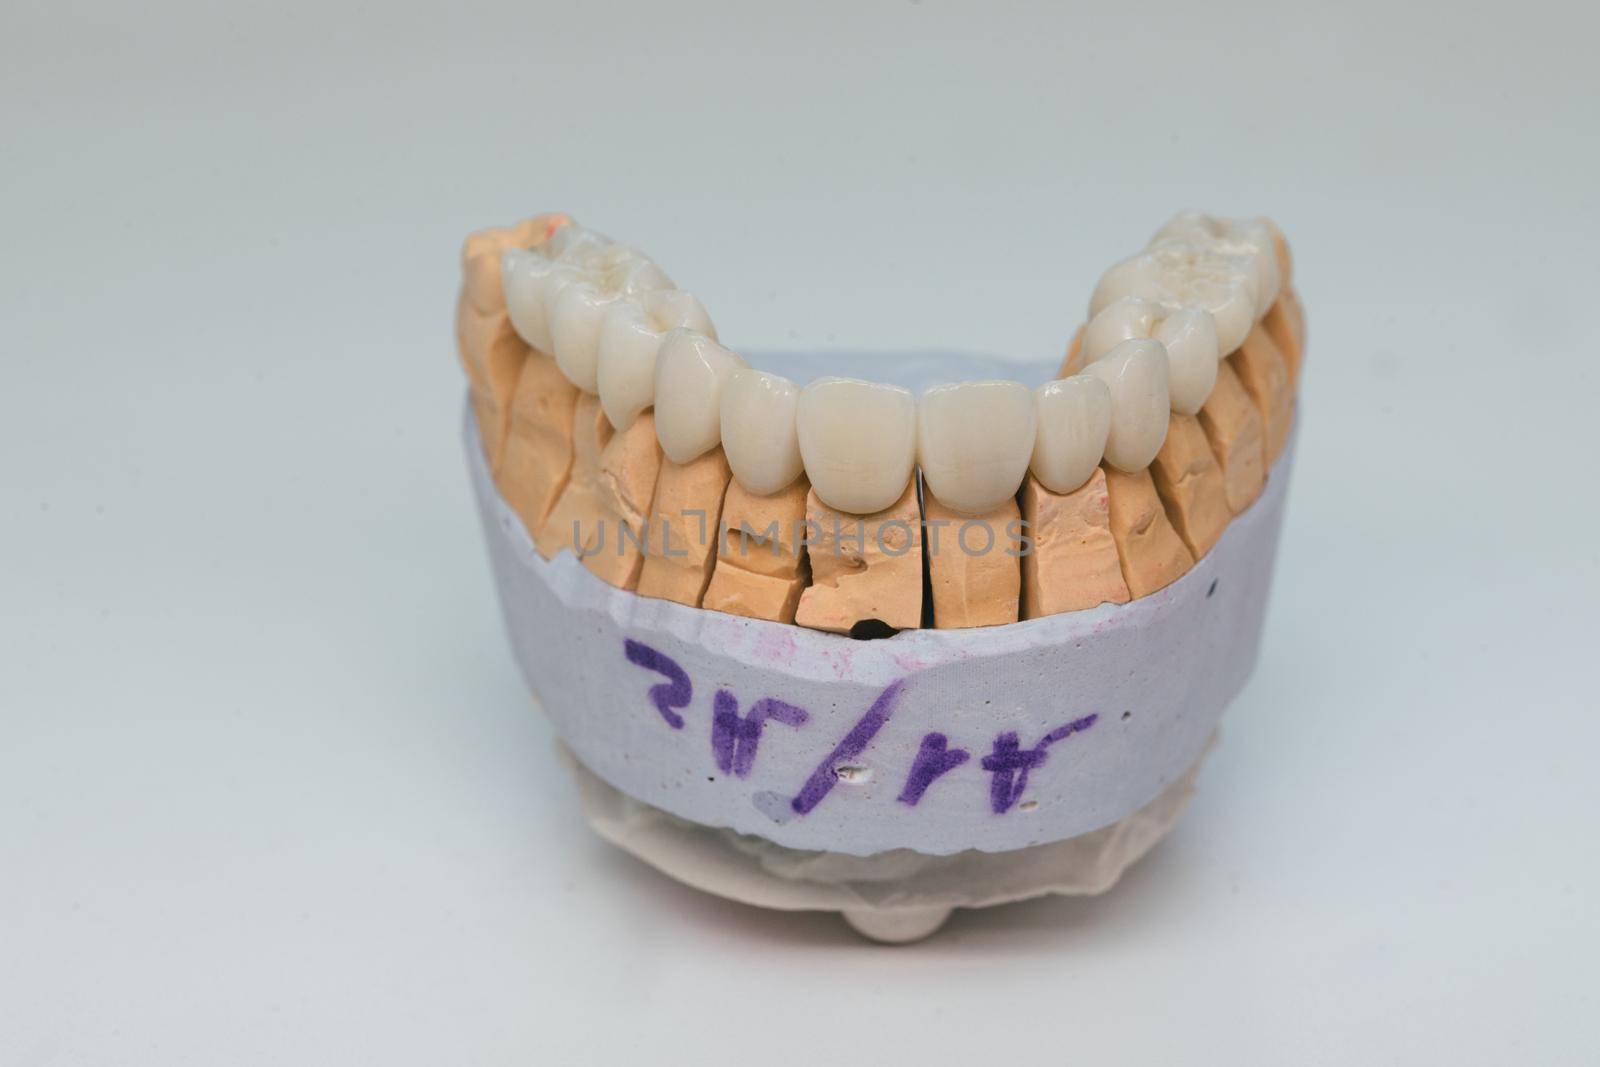 Zirconium crowns. Ceramic teeth with the implant on a plaster model isolated on white background. Ceramic bridge on plaster model